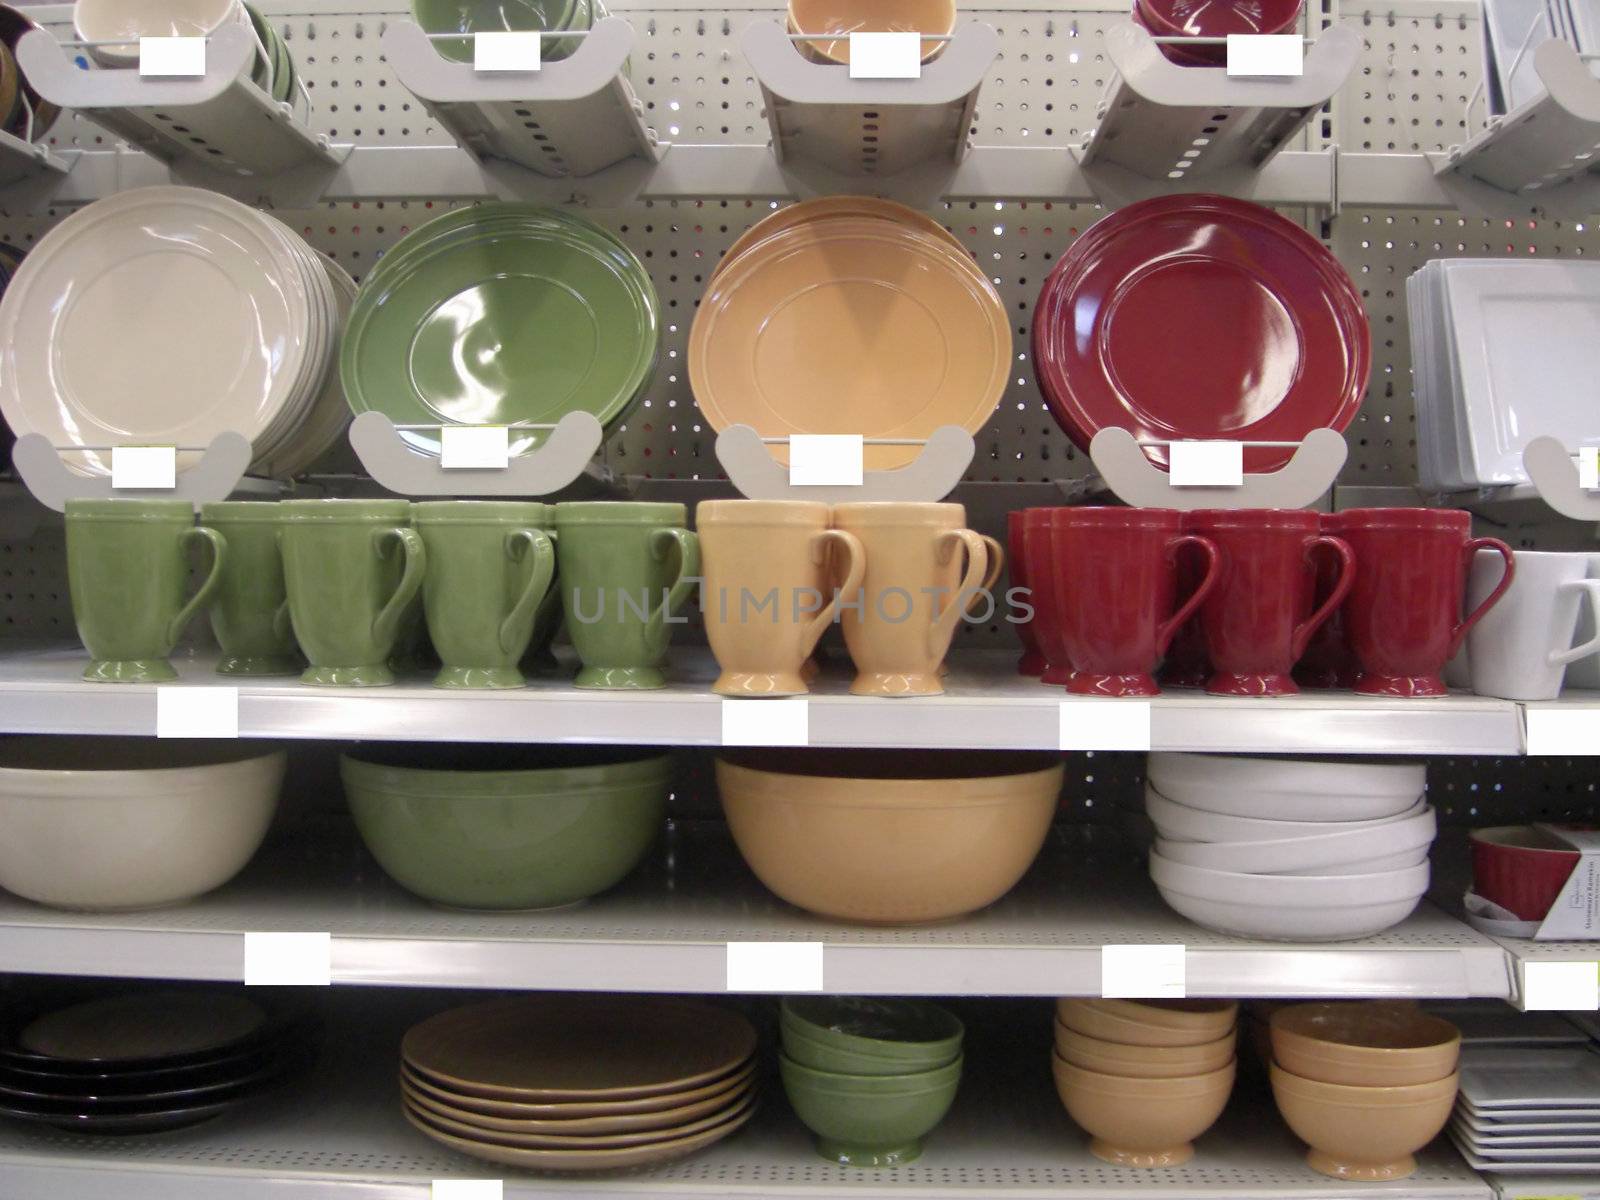 A whole range of colorful kitchen items are neatly displayed on shelves inside a retail store.